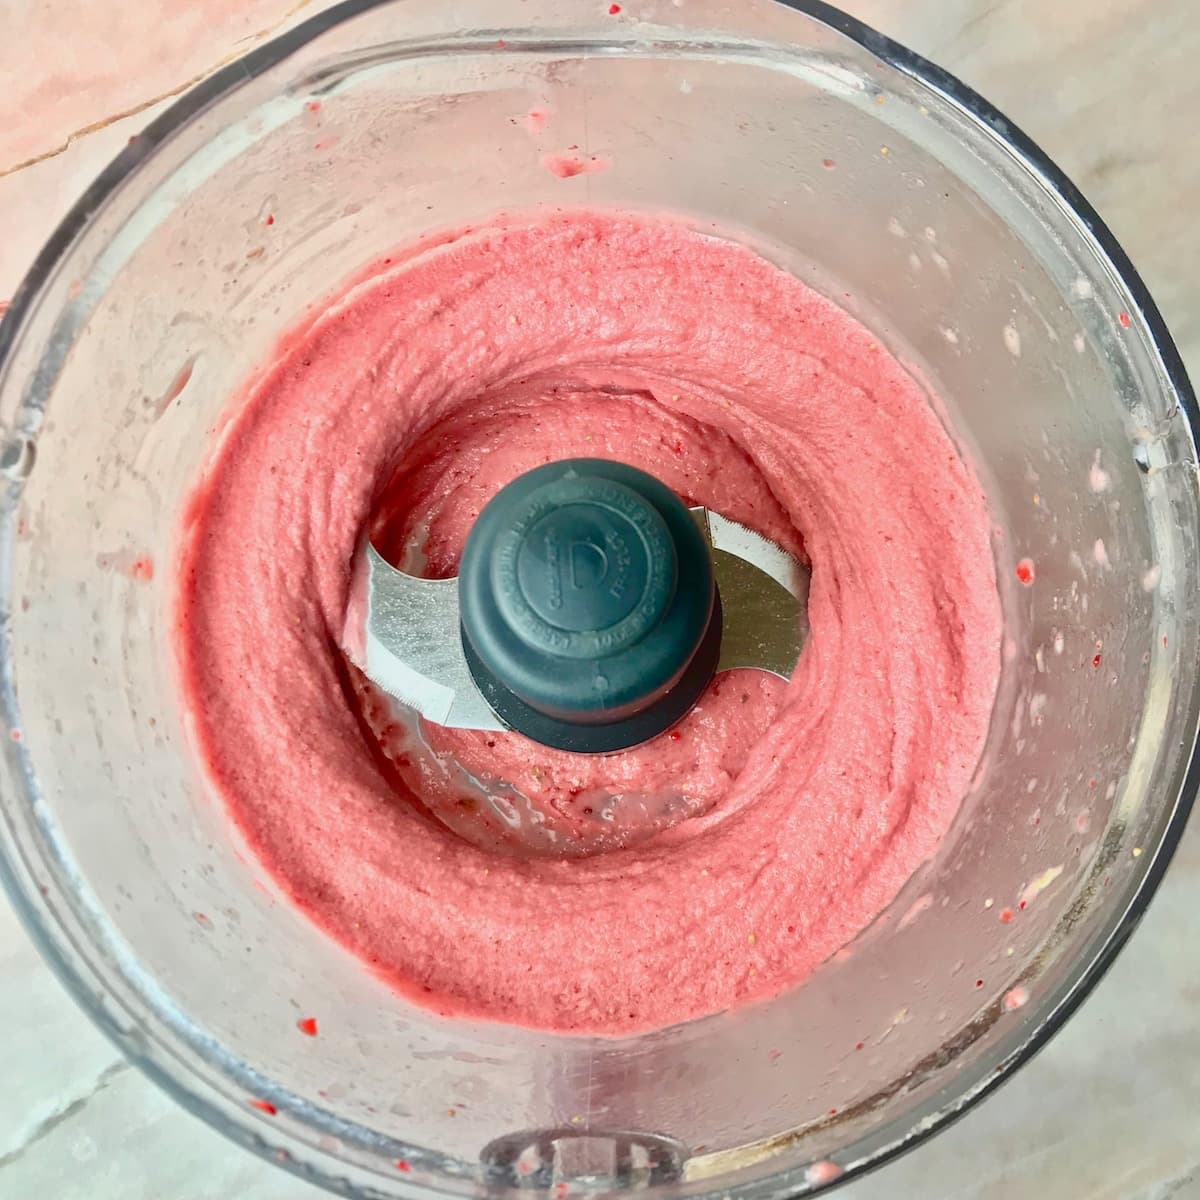 A strawberry and banana smoothie bowl in a food processor.